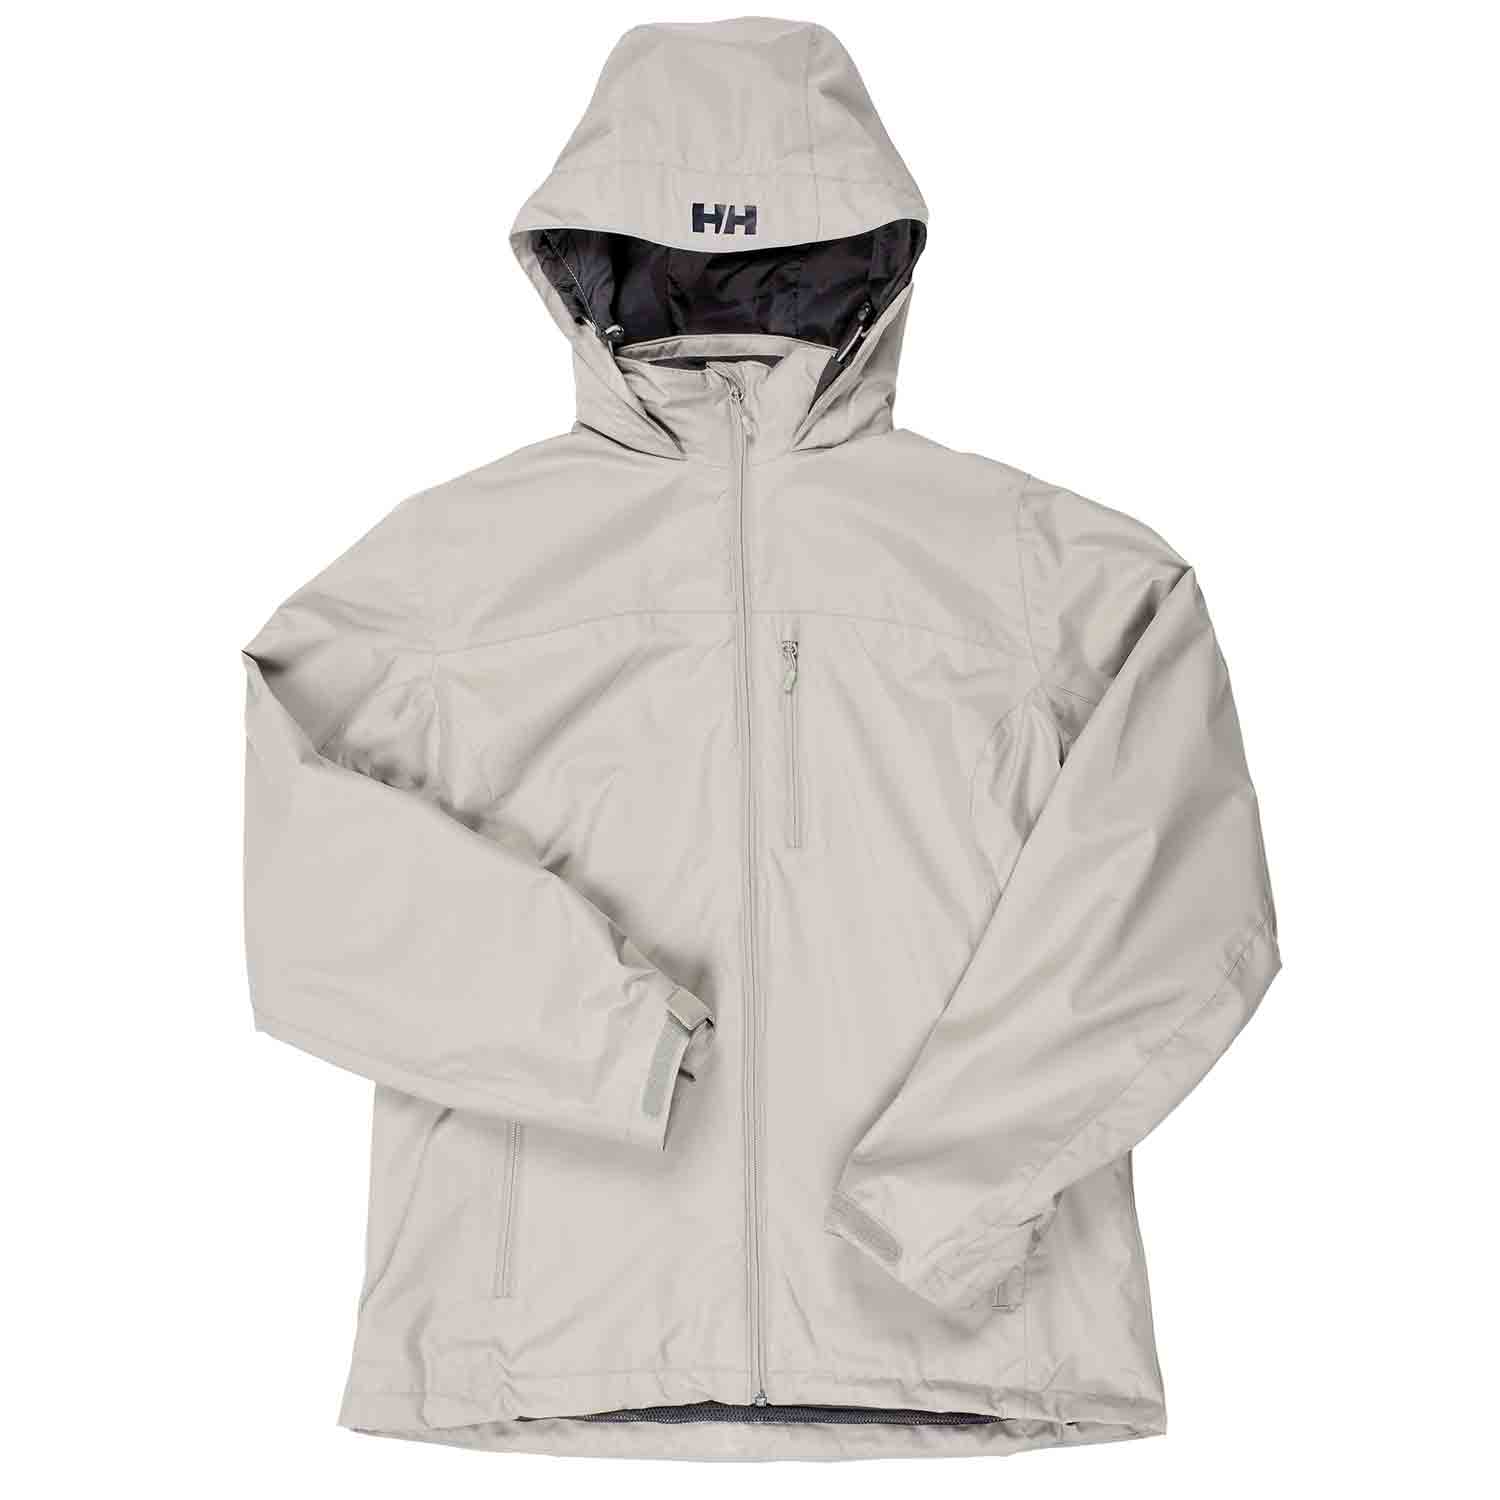 JUMP USA Men Light Grey Rapid-Dry Solid Sporty Jackets With Hood M / LIGHT GREY